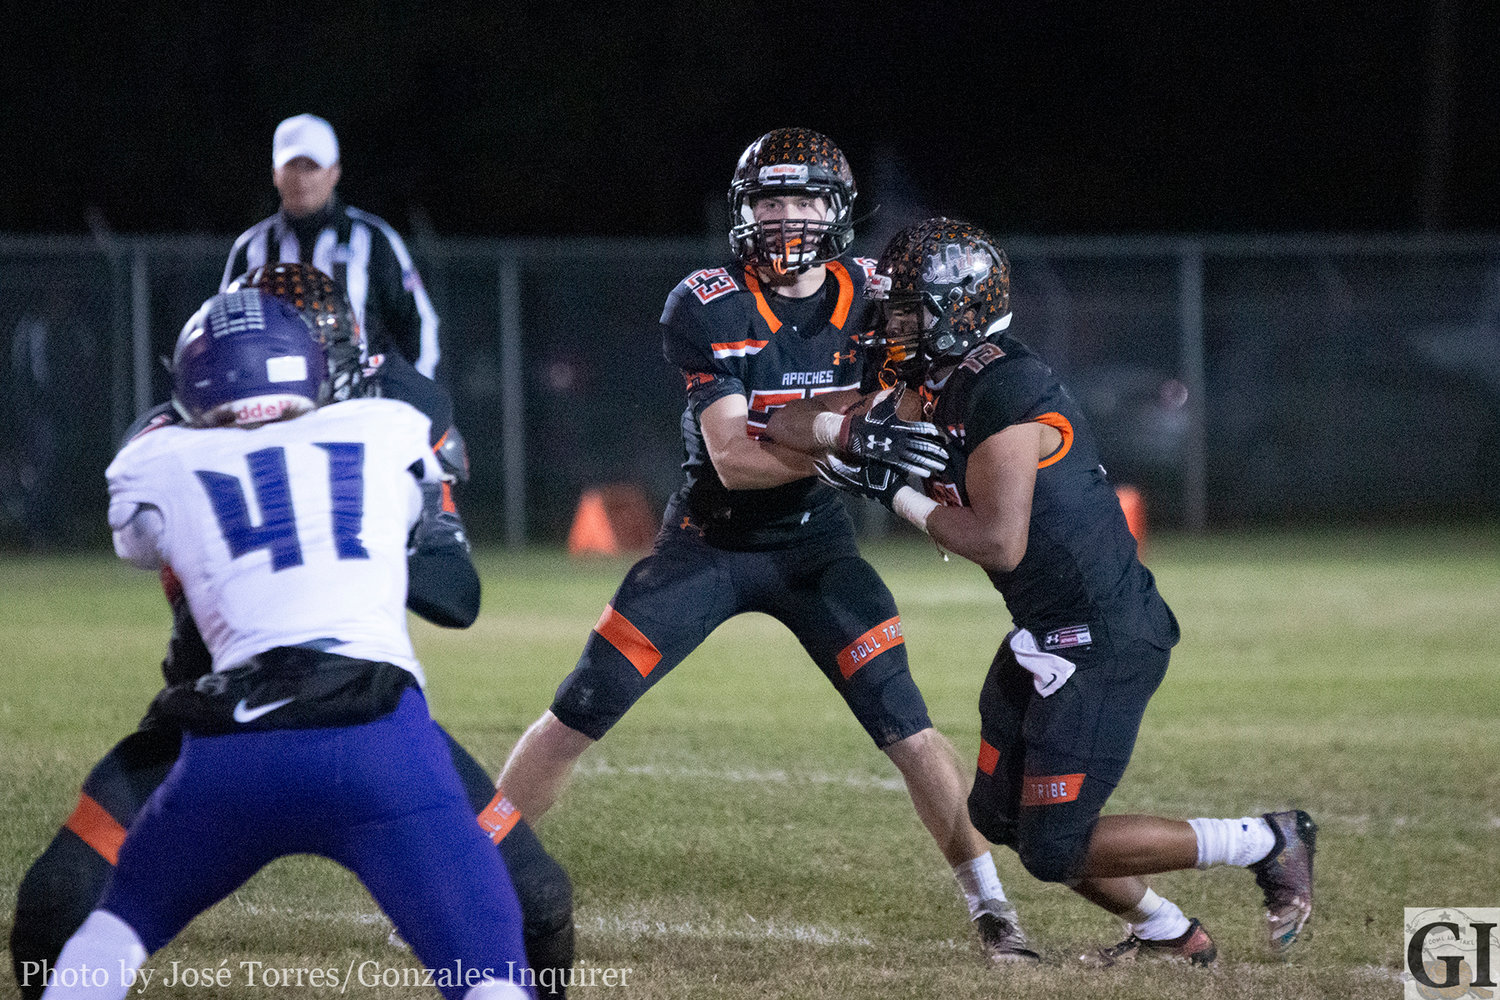 Behind the stout Gonzales Apache line, the offense had no trouble rushing the ball with Heath Henke at quarterback at James Martinez taking the bulk of the carries in Gonzales' 35-28 upset win over Boerne.